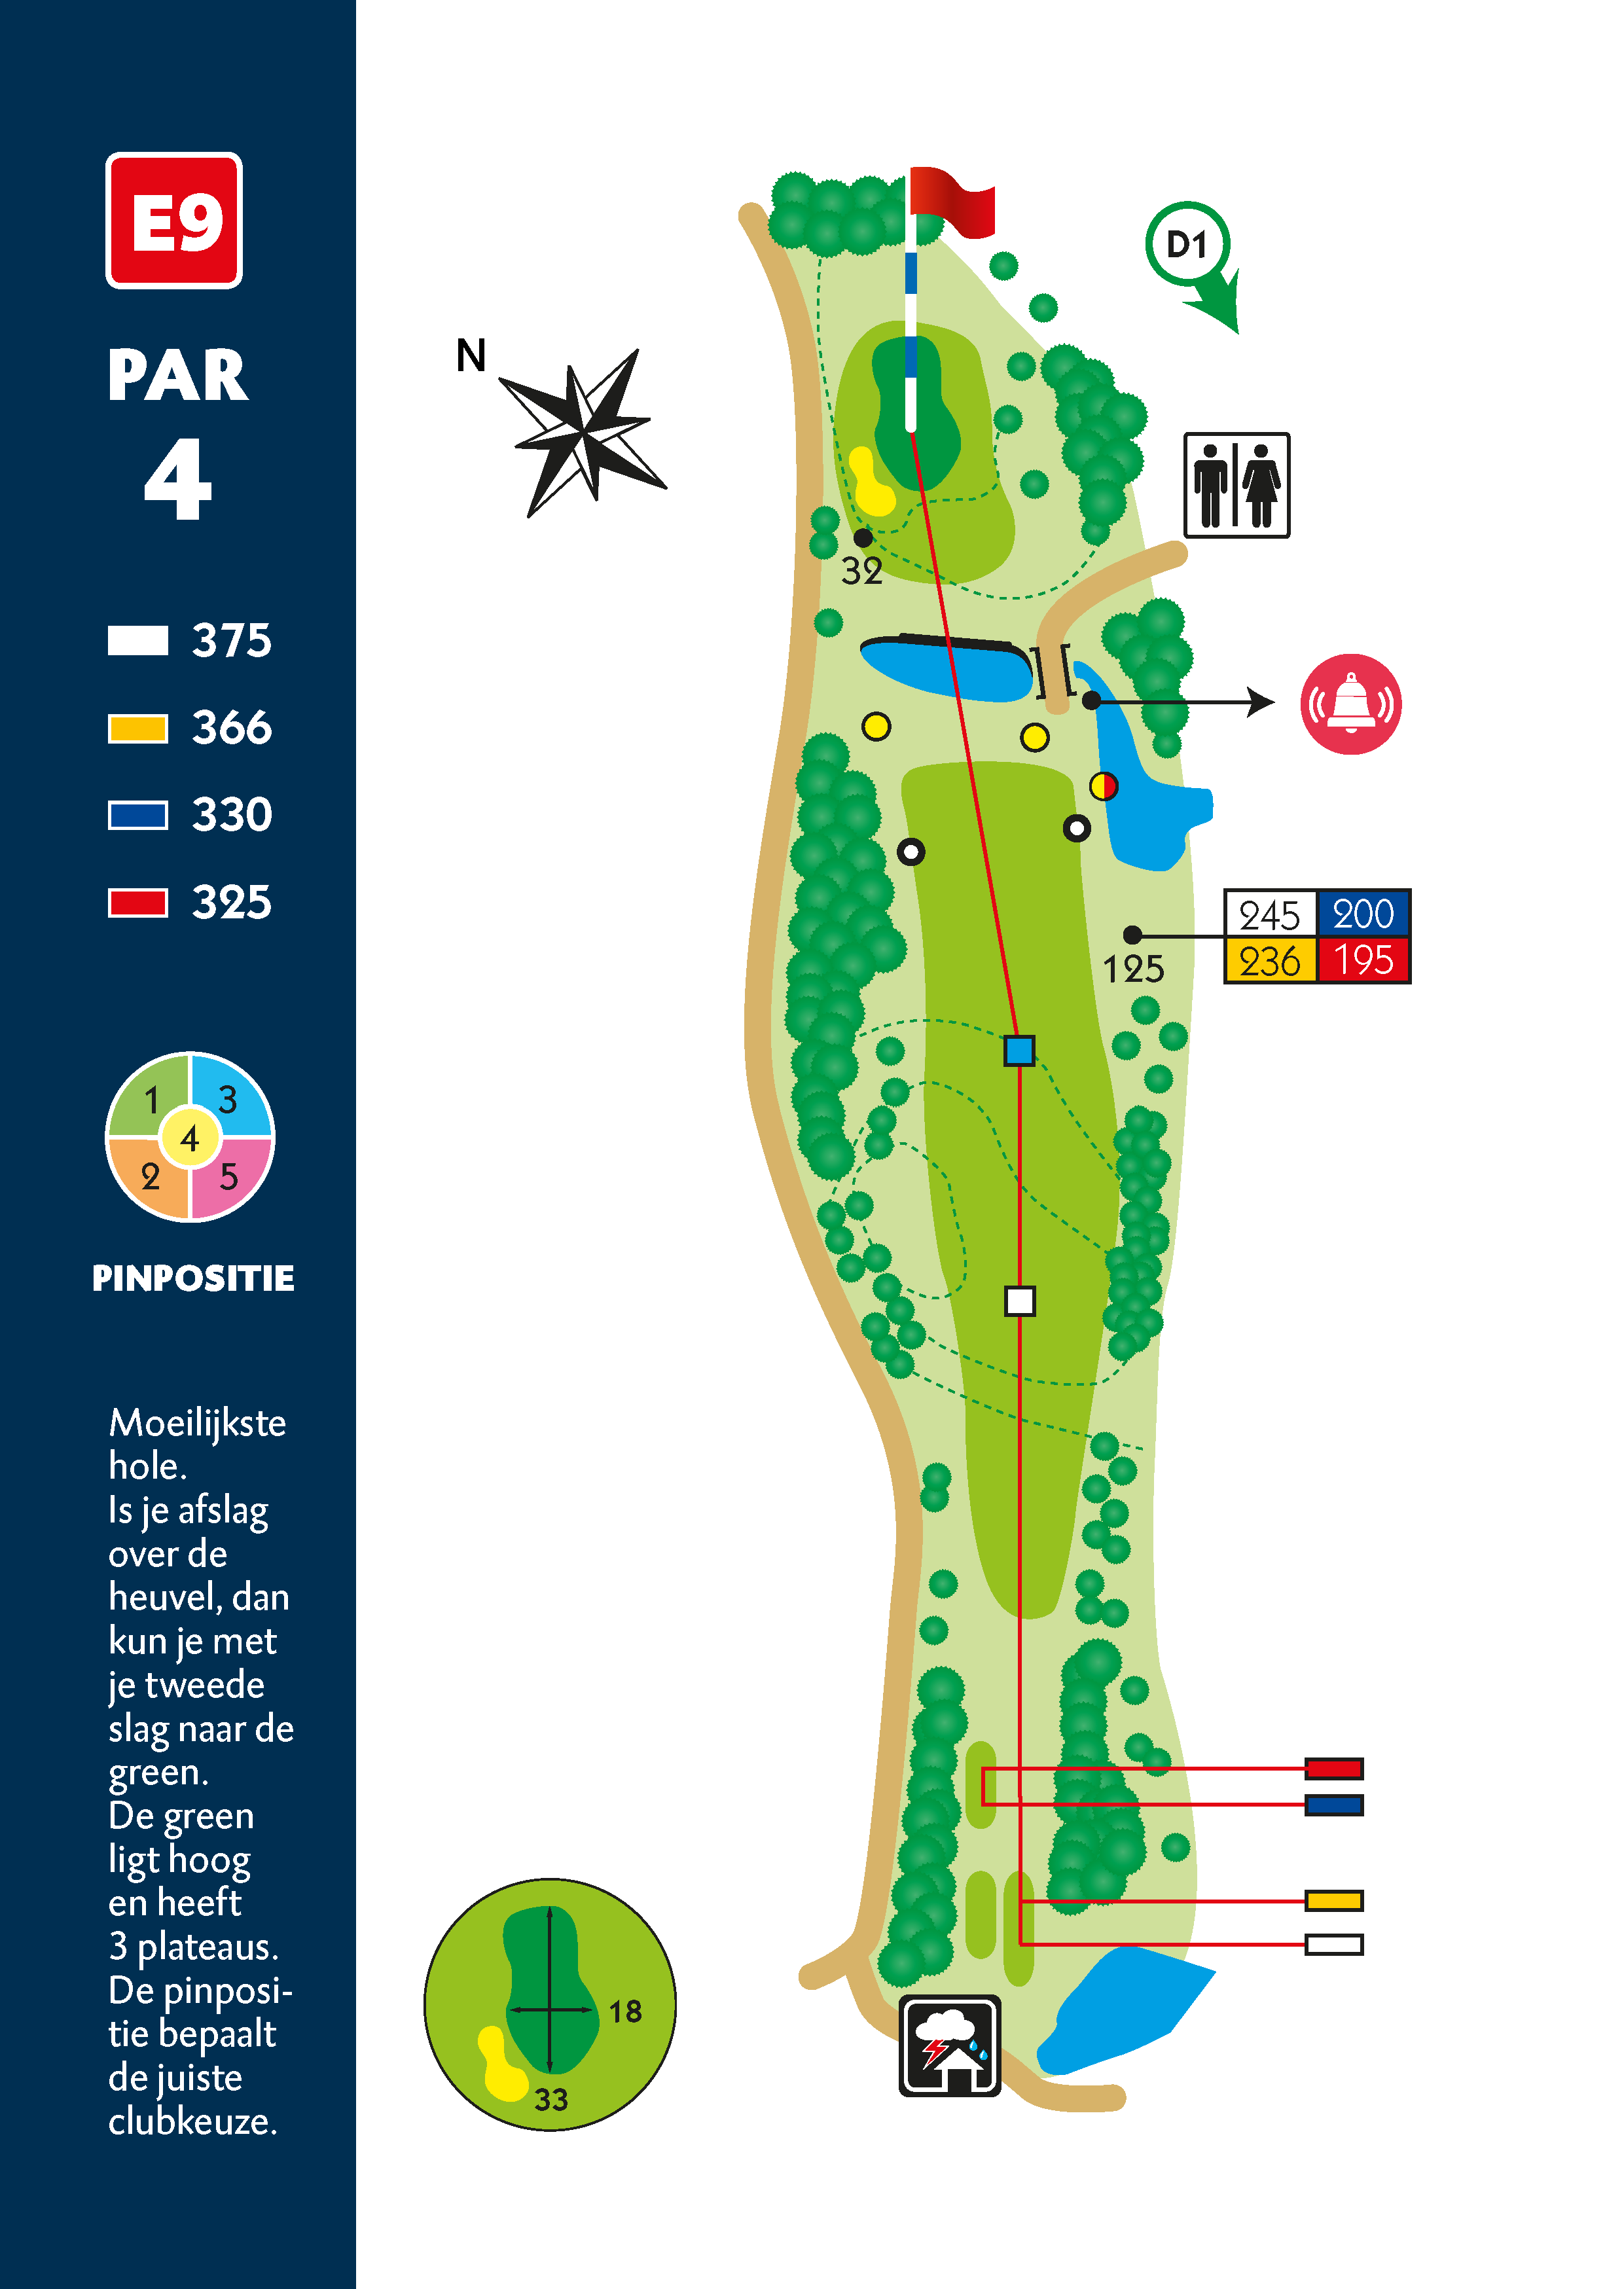 hole9.png